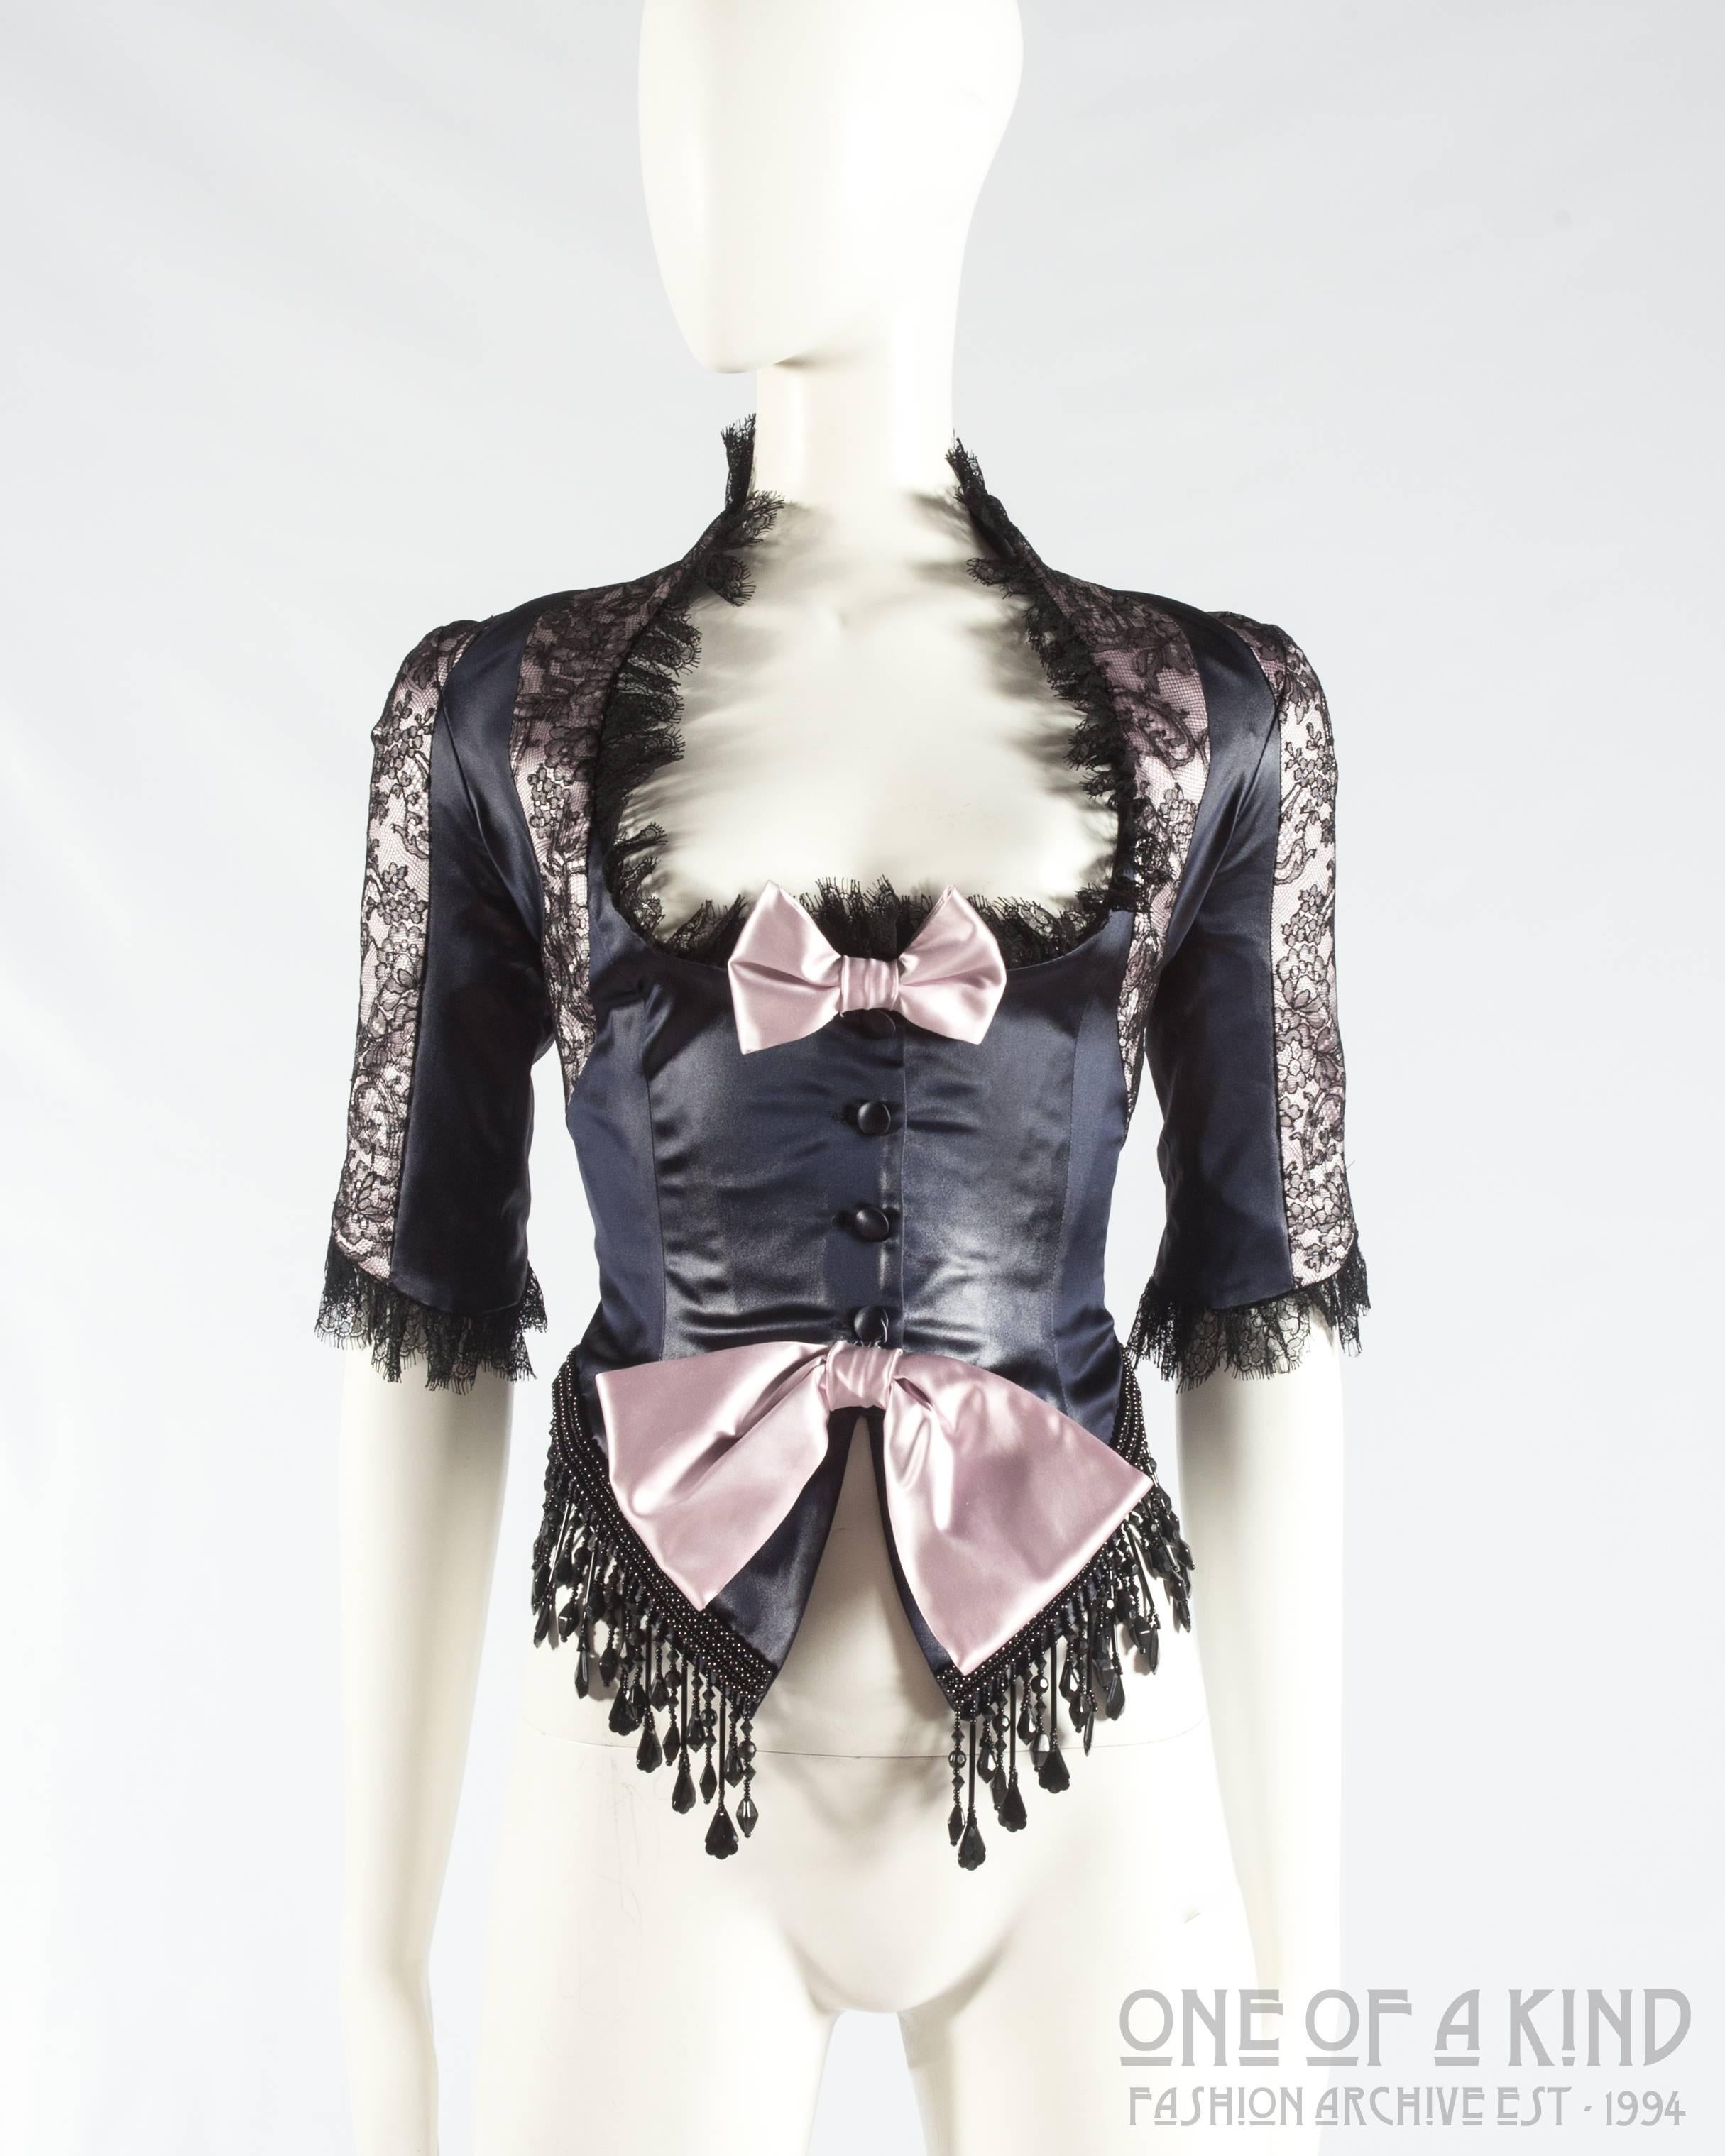 John Galliano black acetate and lace fringed evening jacket

- beaded fringe 
- lace trim 
- button closures 
- low cut neckline 
- two pink decorative bows on front 
- one black velvet decorative bow on back 

Spring-Summer 1994